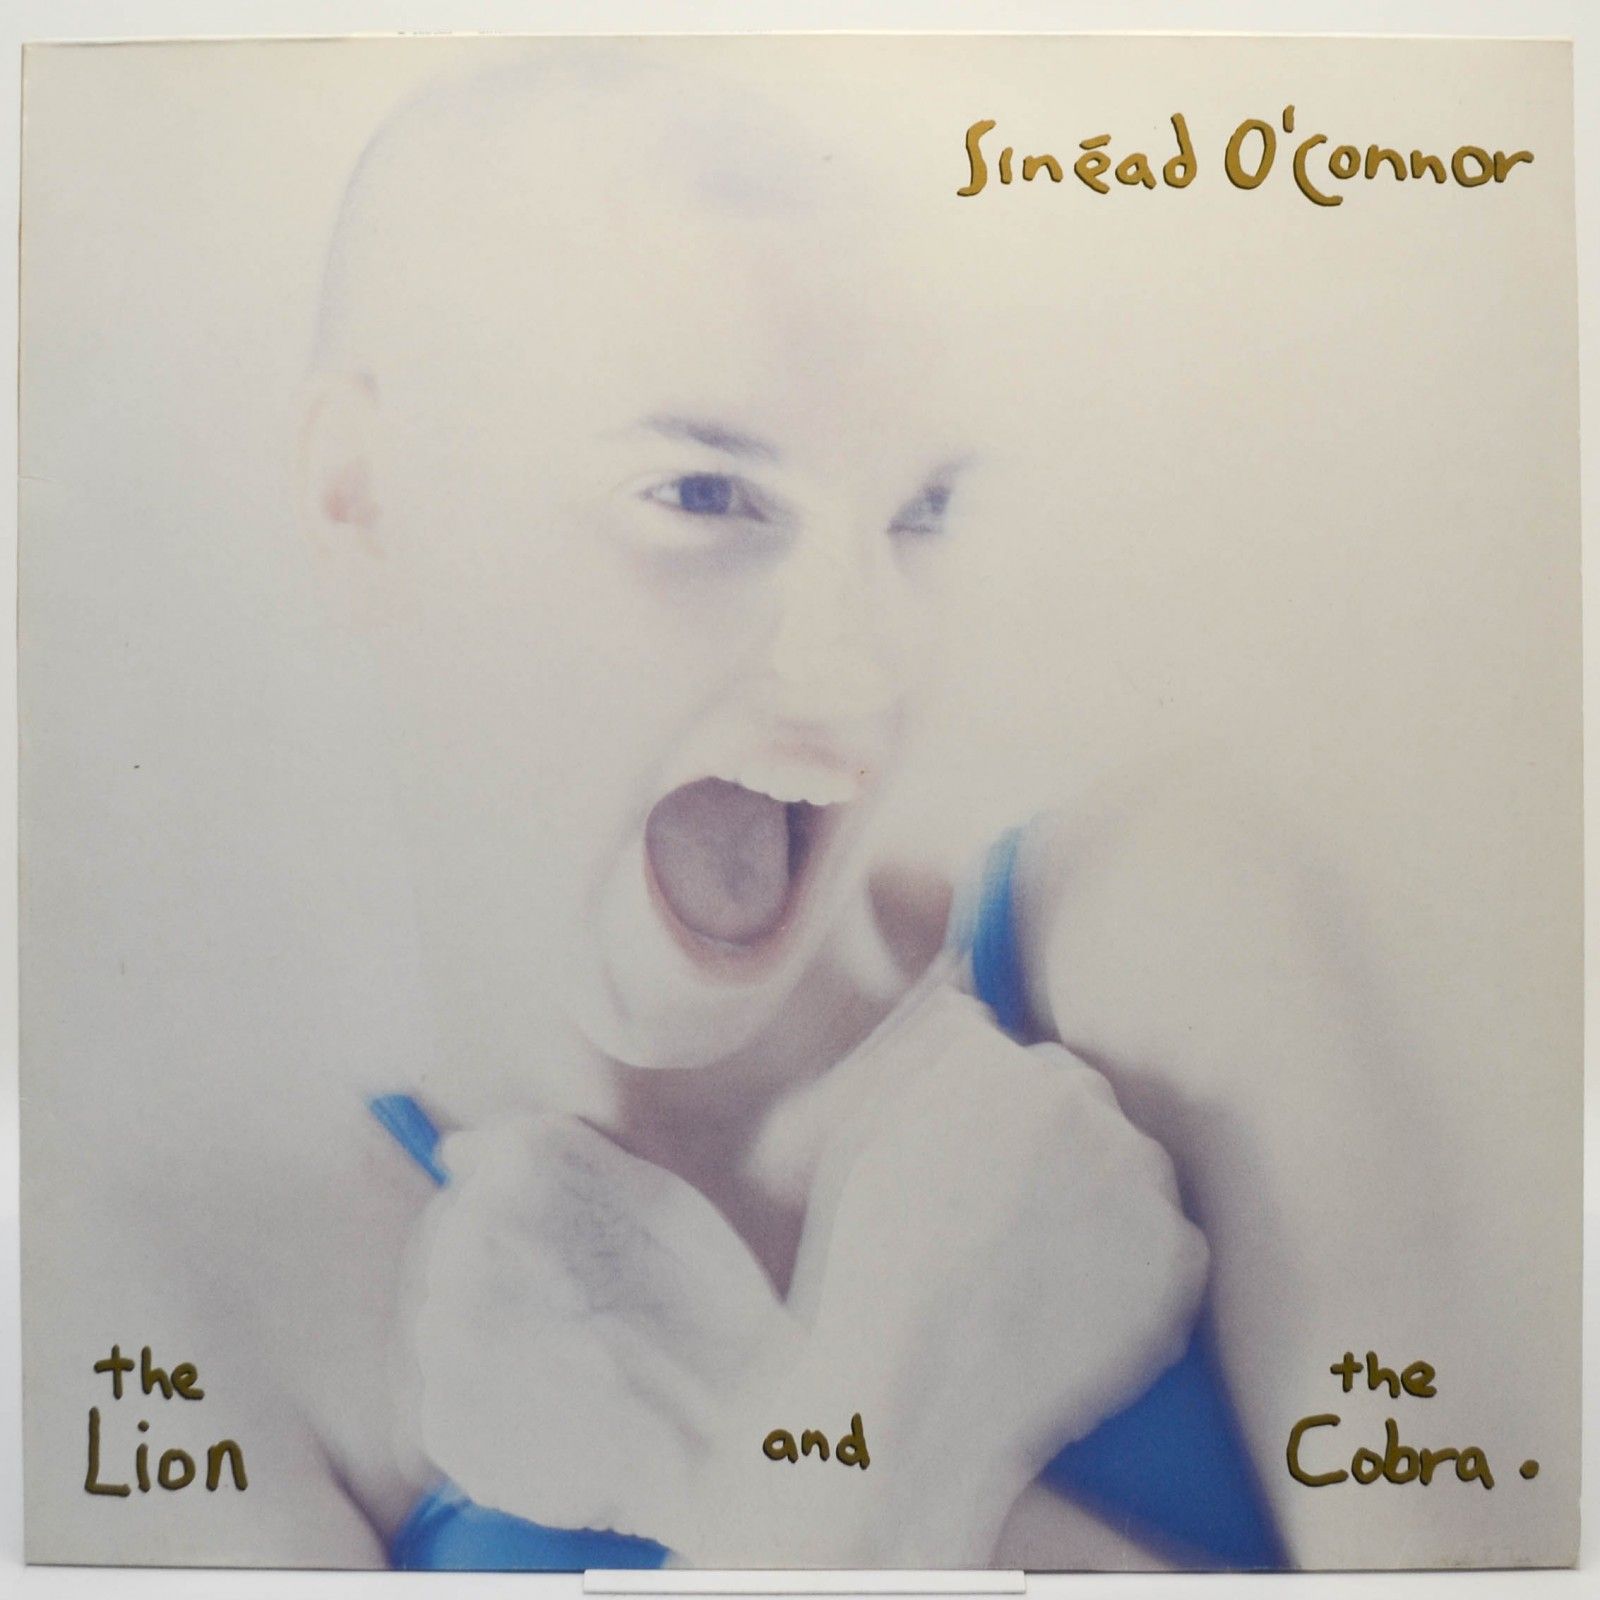 Sinéad O'Connor — The Lion And The Cobra, 1987